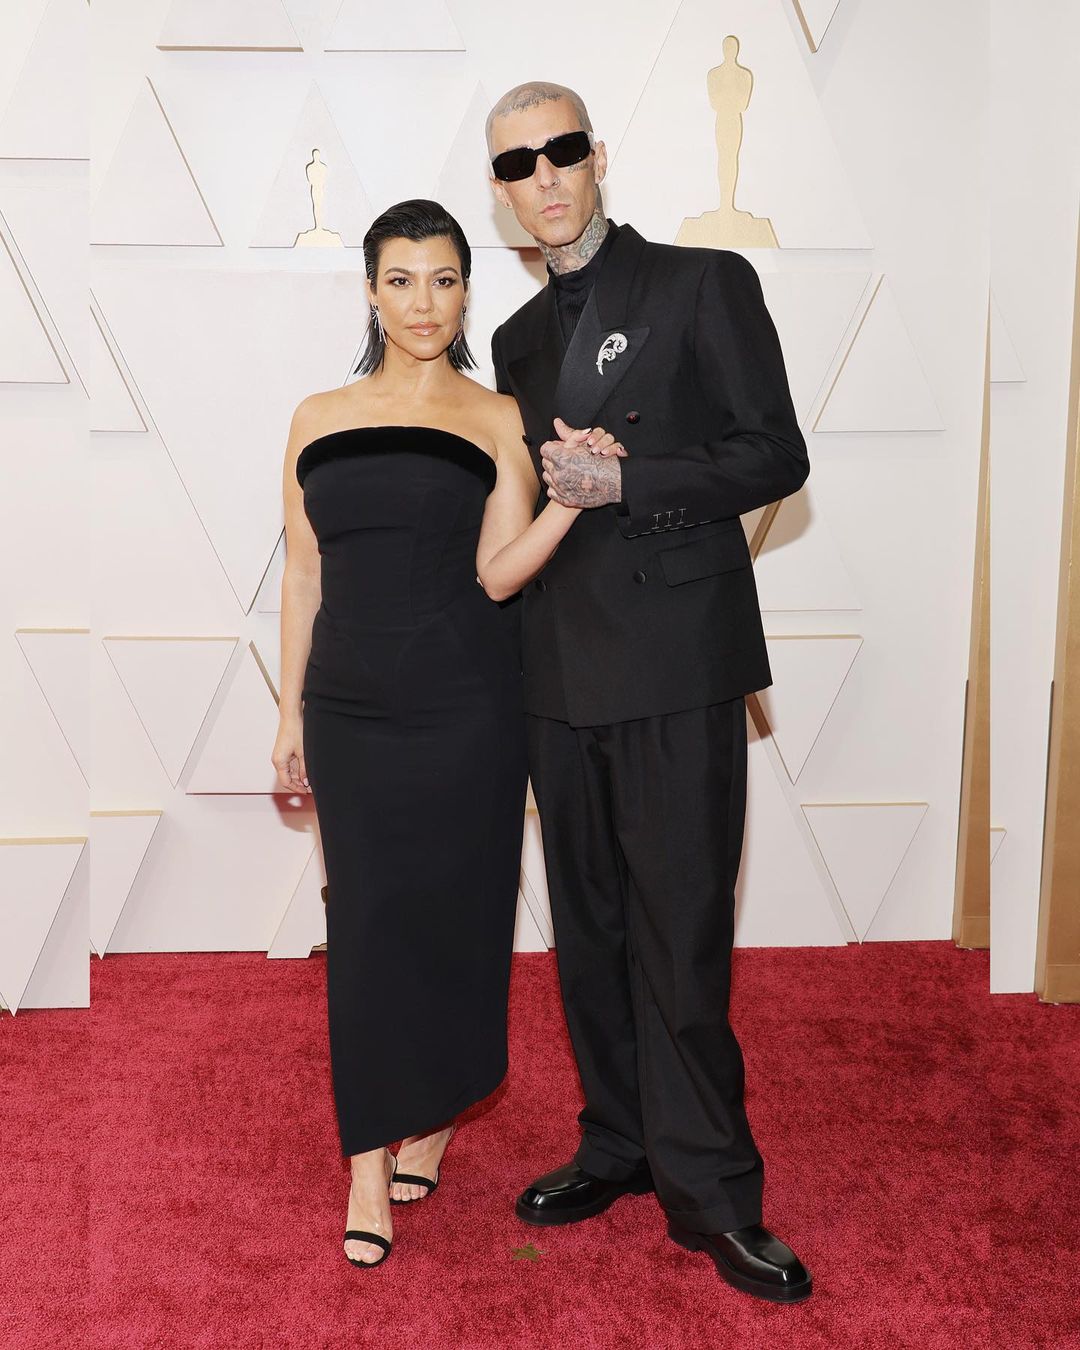 Kourtney Kardashian and Travis Barker looked chic in their all-black outfits